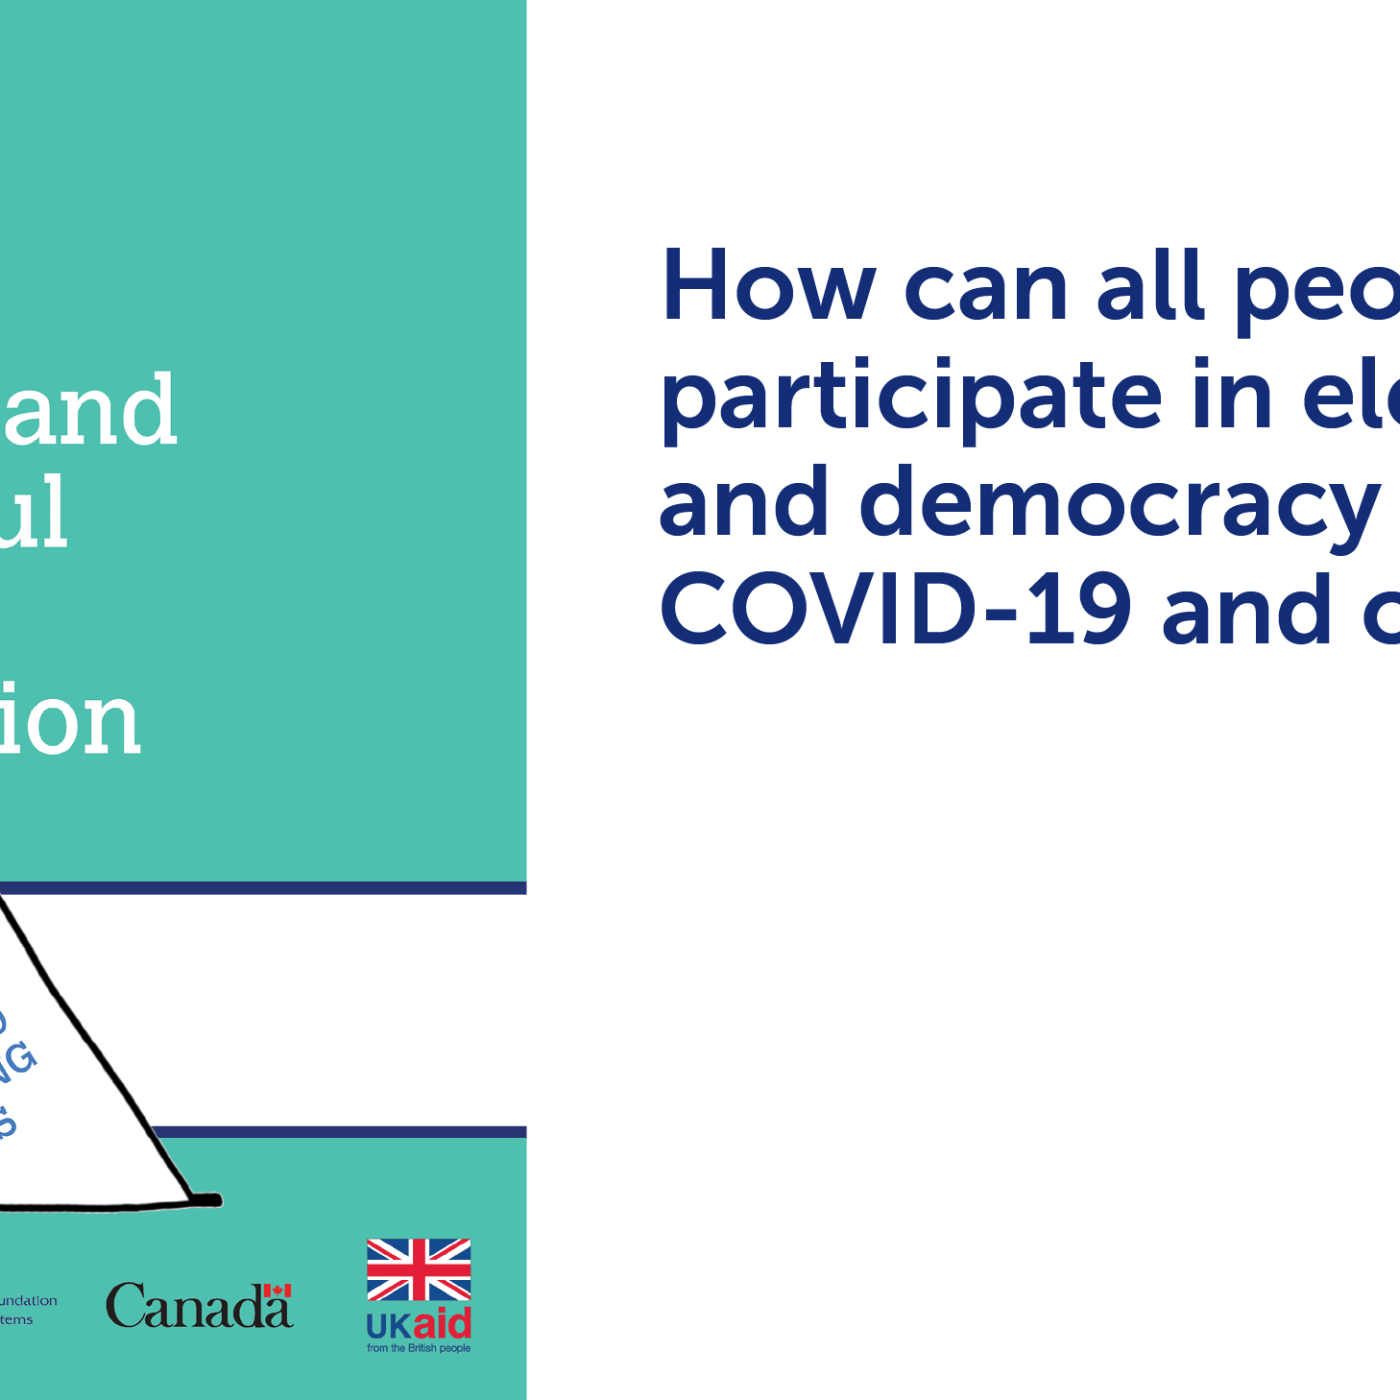 Cover of  "IFES COVID-19 Briefing Series: Inclusion and Meaningful Political Participation" | How can all people participate in elections and democracy during COVID-19 and other crises?